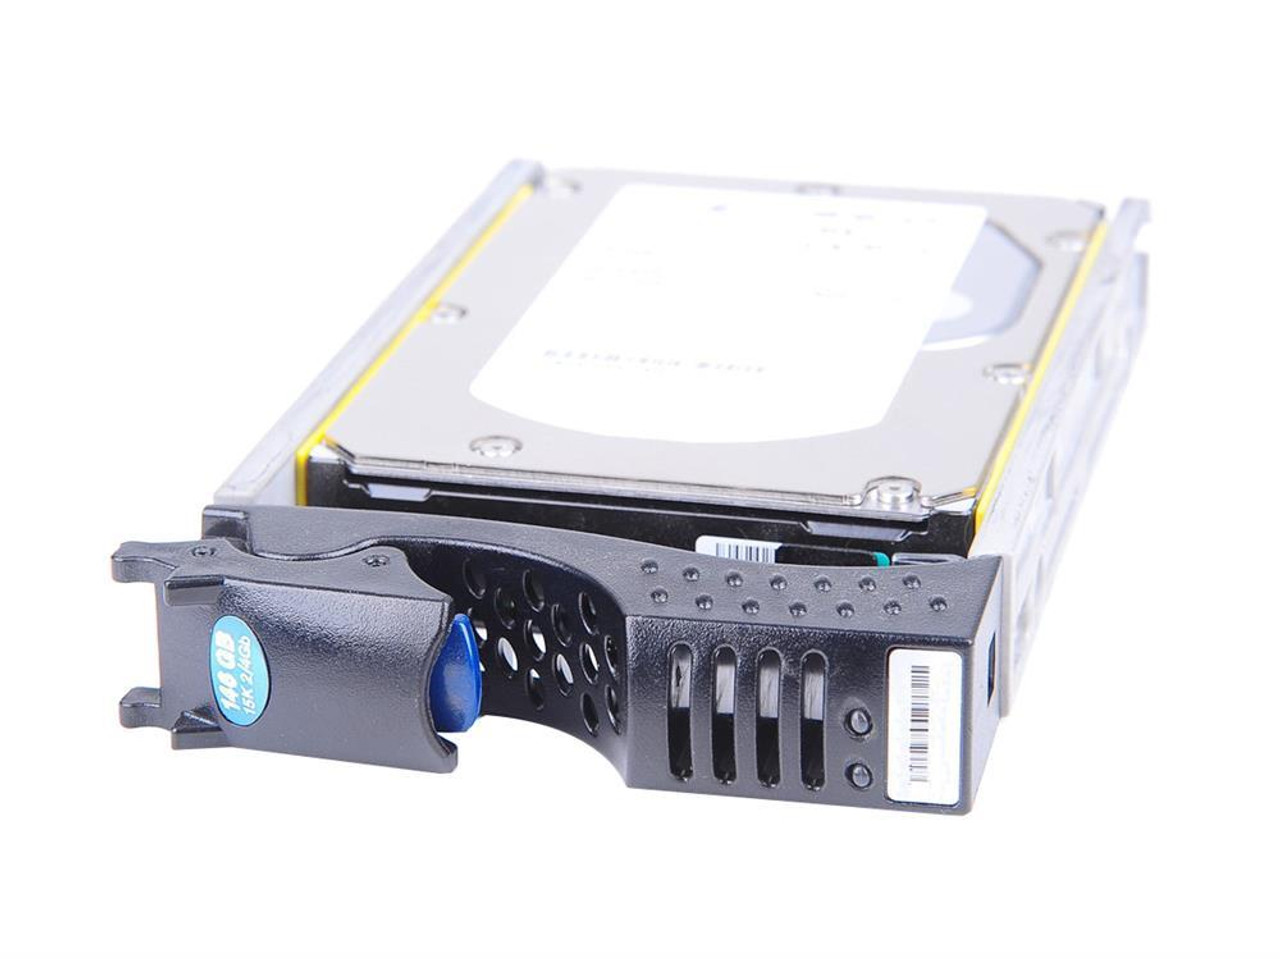 5049426 EMC 146GB 15000RPM Fibre Channel 4Gbps 3.5-inch Internal Hard Drive for CLARiiON CX Storage Systems